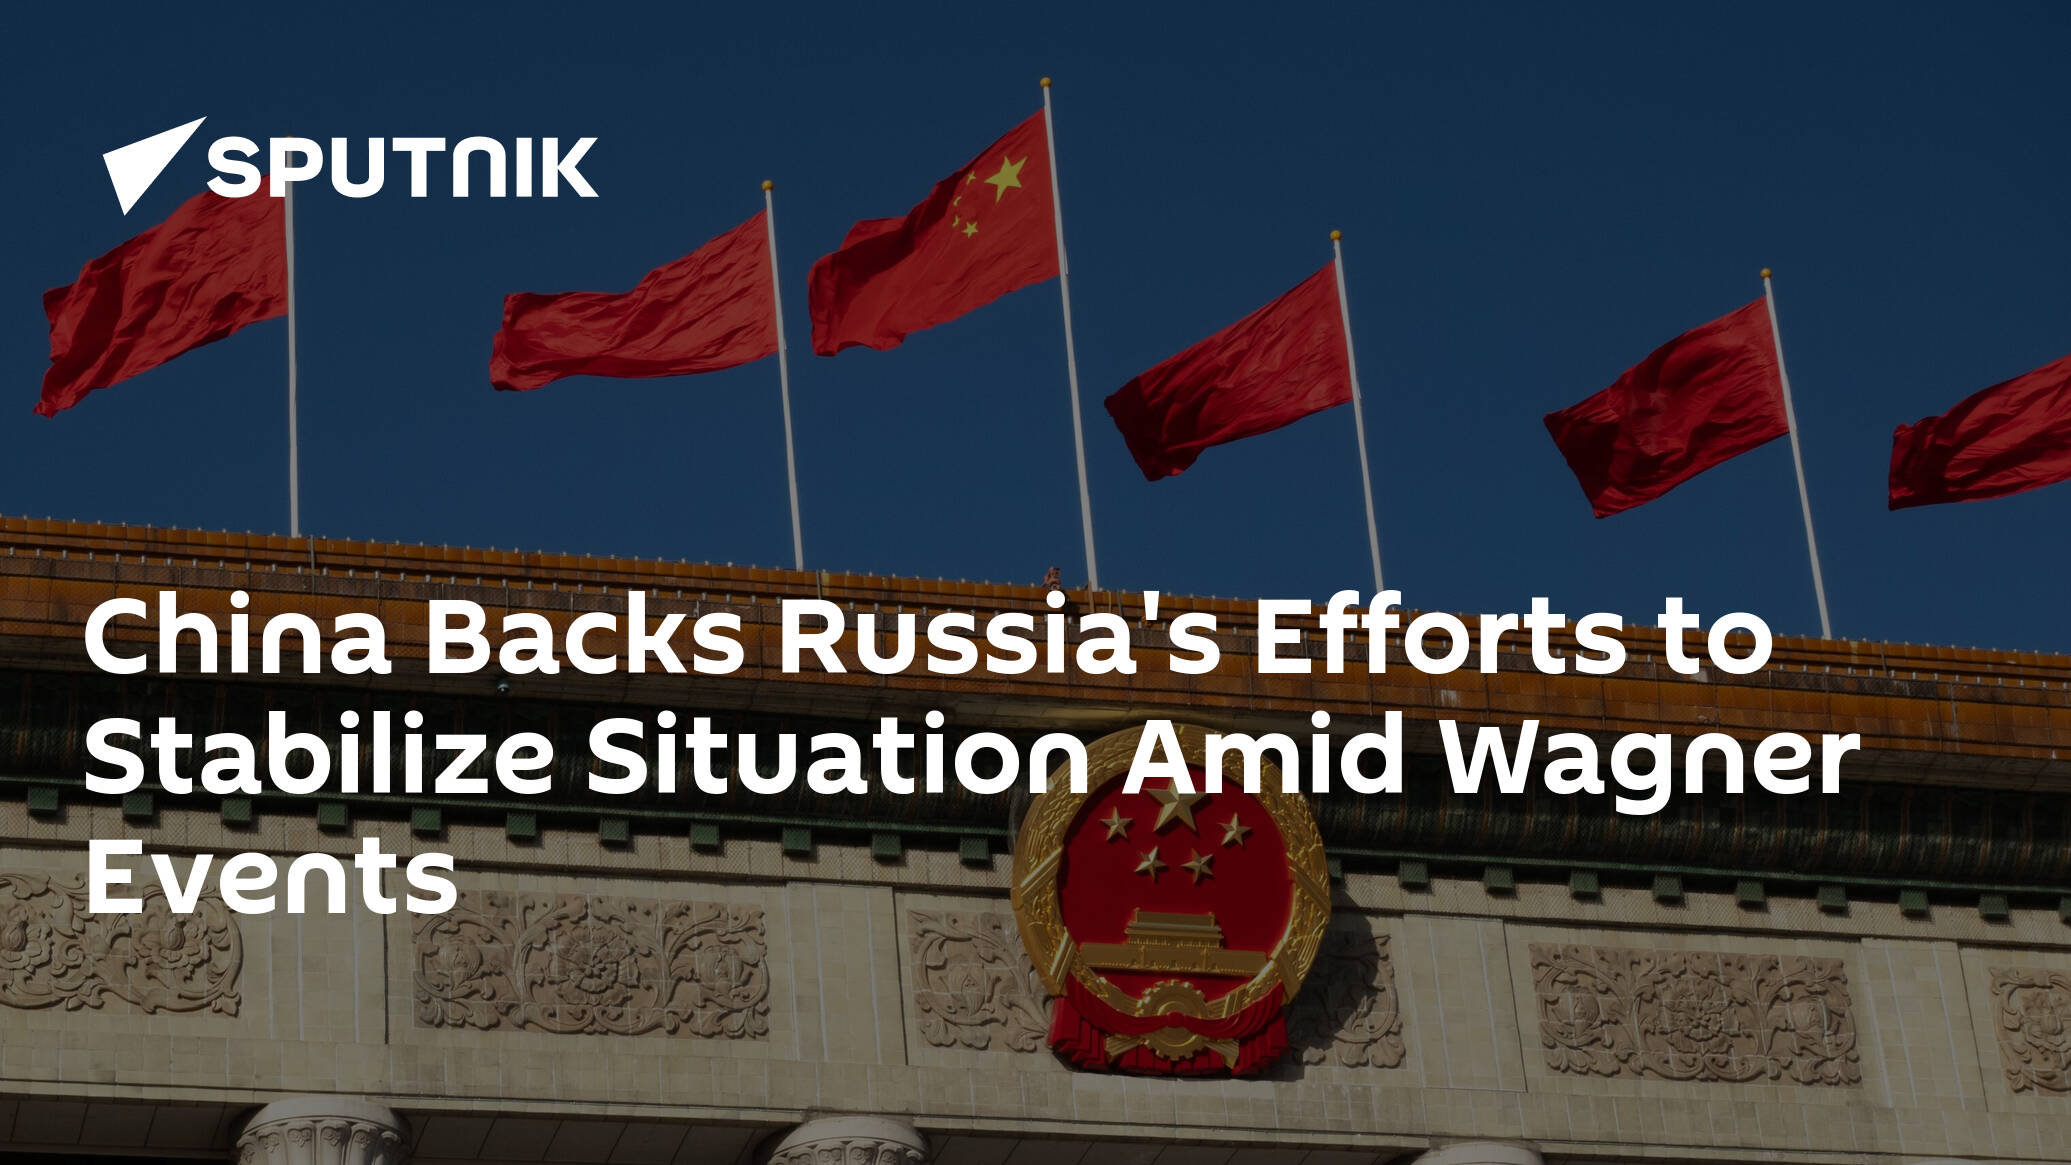 China Backs Russia's Efforts to Stabilize Situation Amid Wagner Events